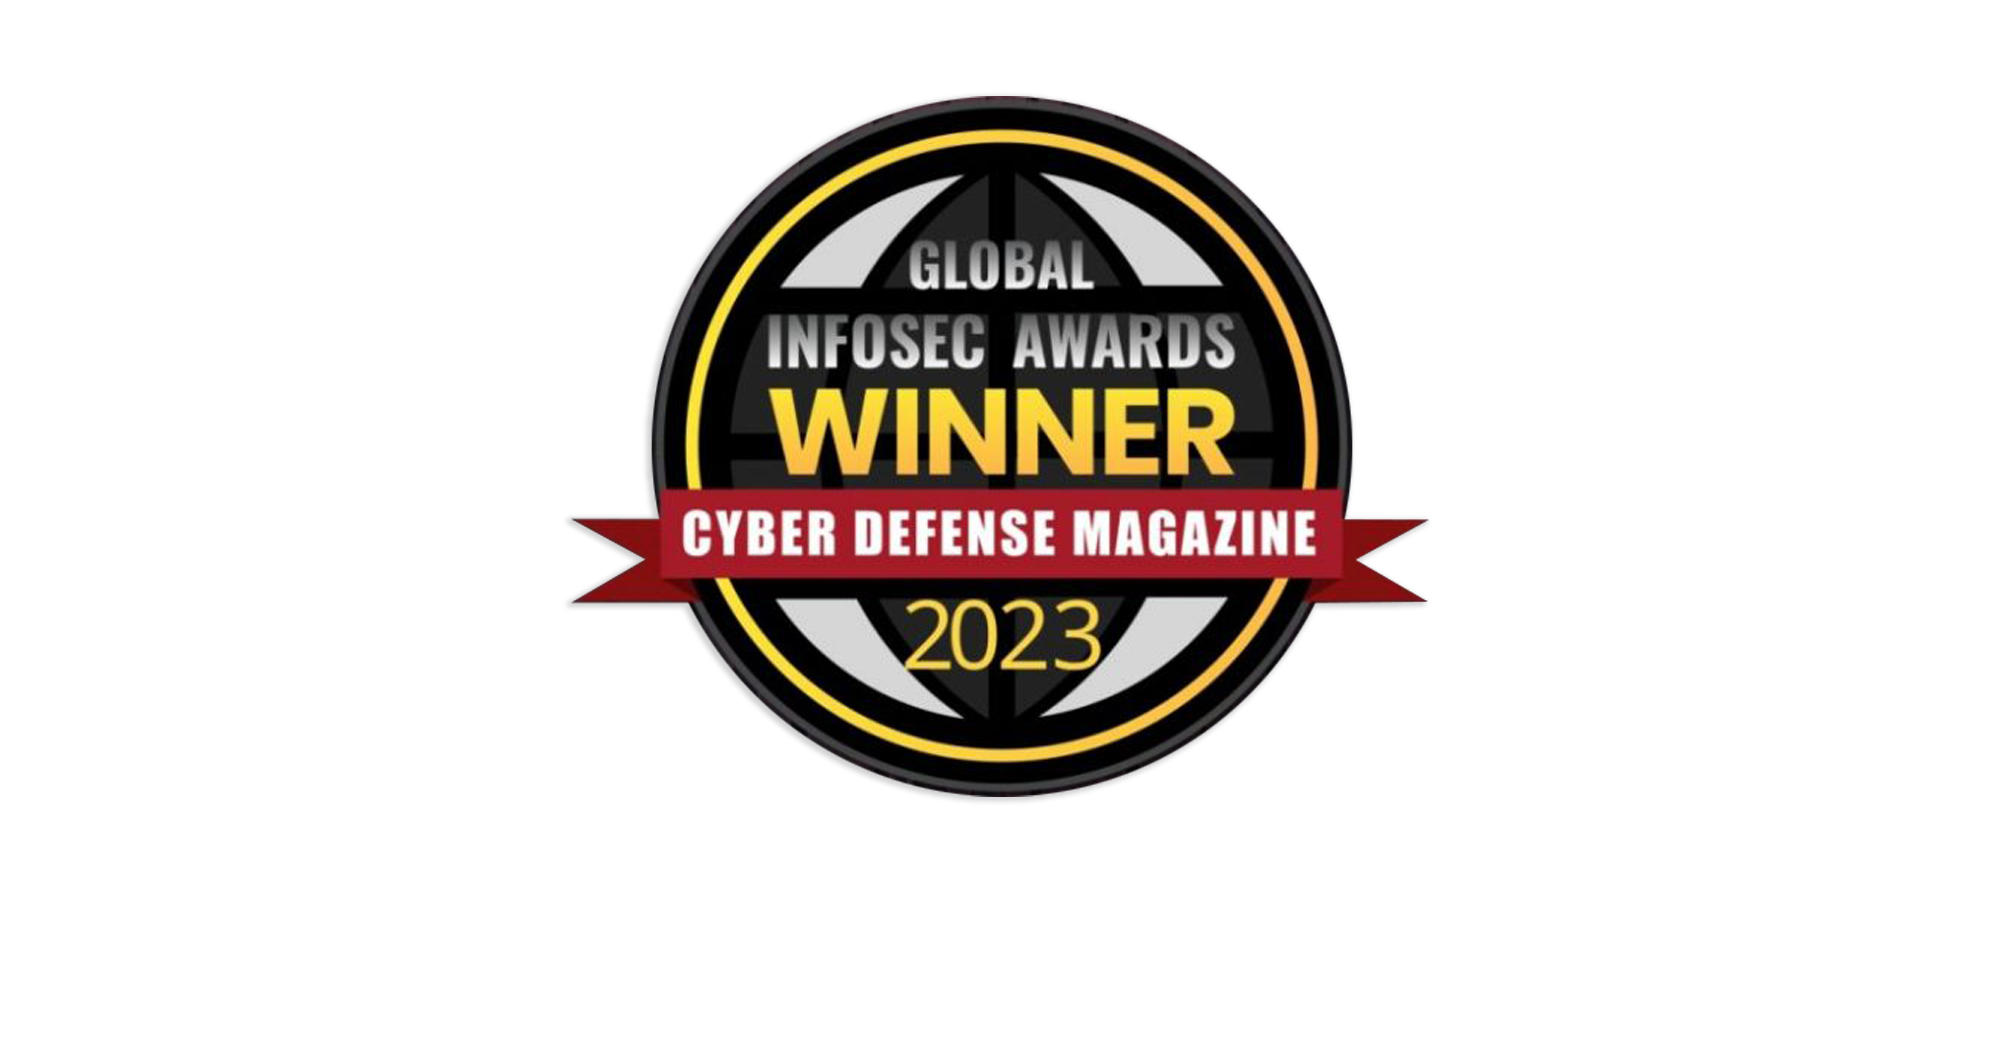 Resecurity Named Global InfoSec Award Winner at RSA Conference 2023